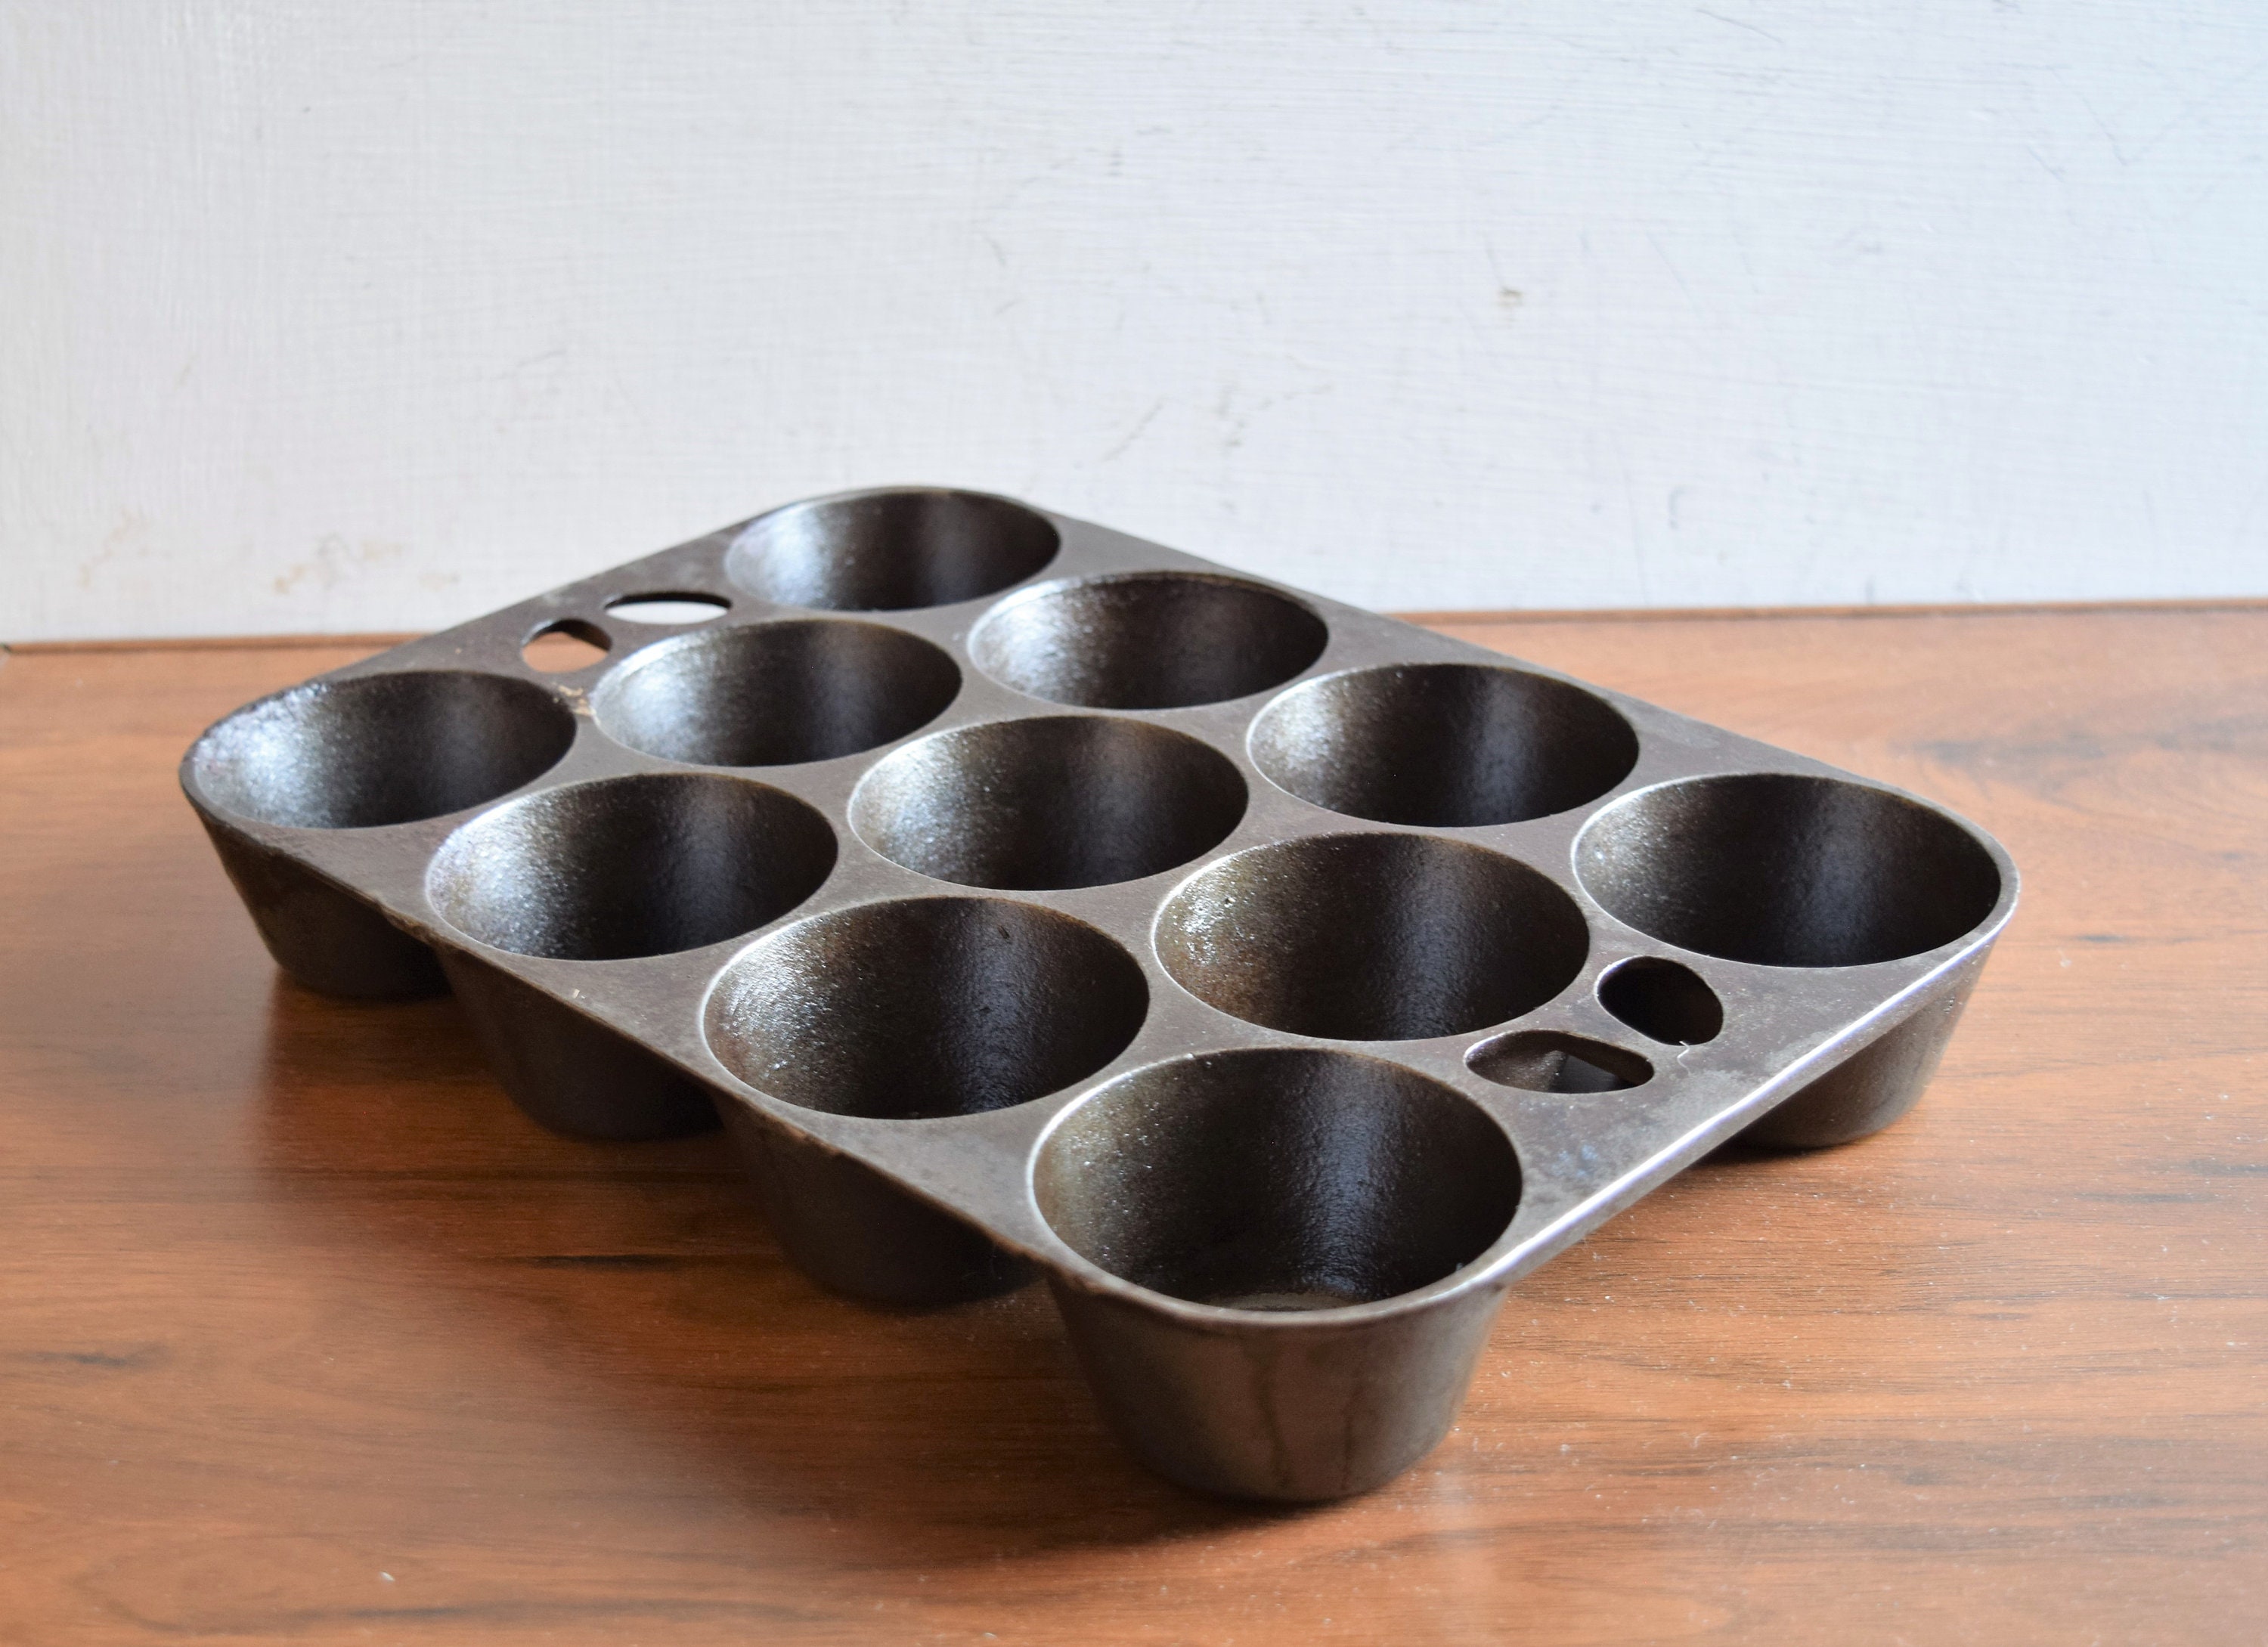 Griswold No 10 Cast Iron Muffin Pan/ US Baking Tray/ Vintage Metal